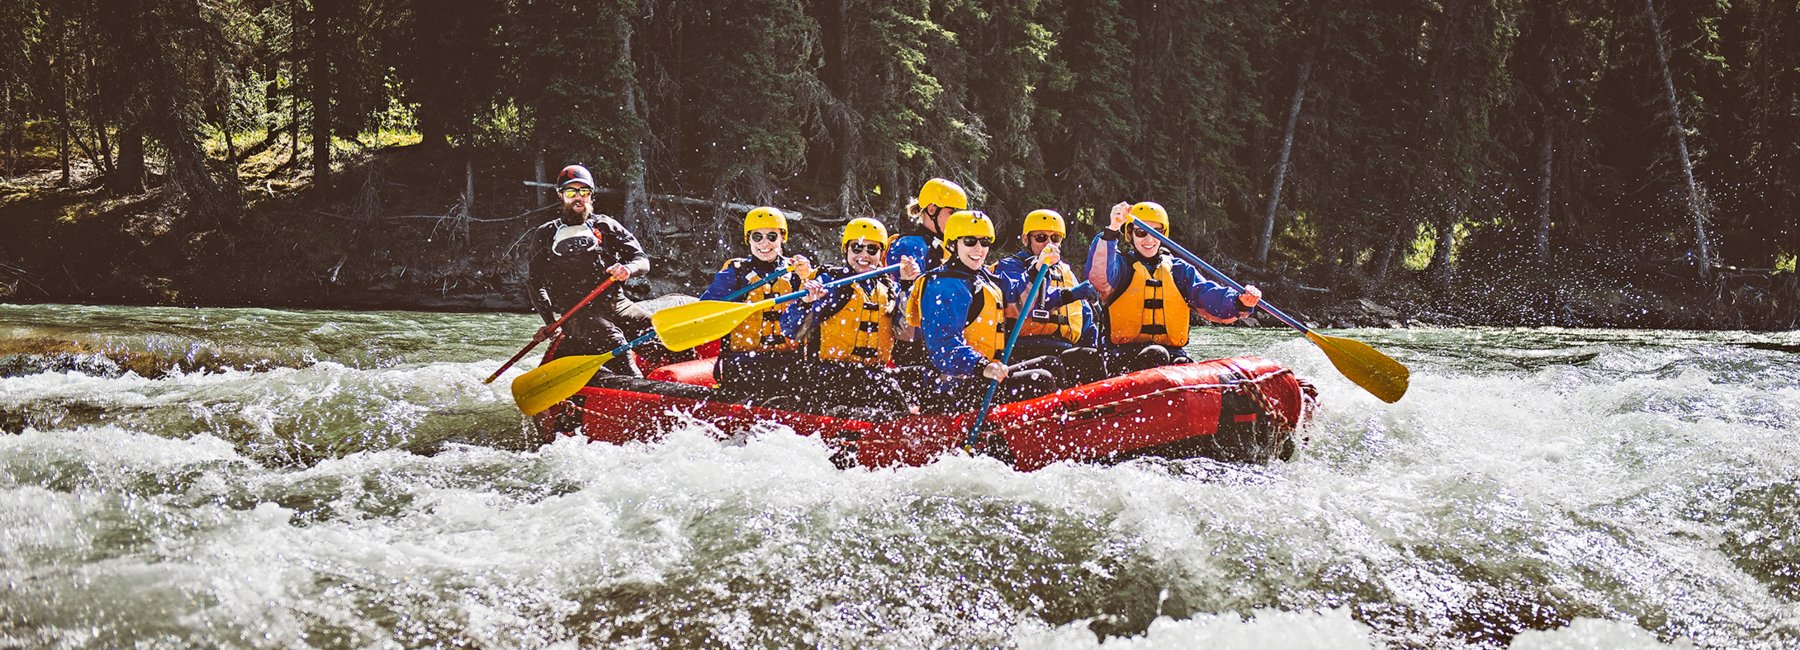 Group on a raft from Mukwah Rafting going down Panther River.